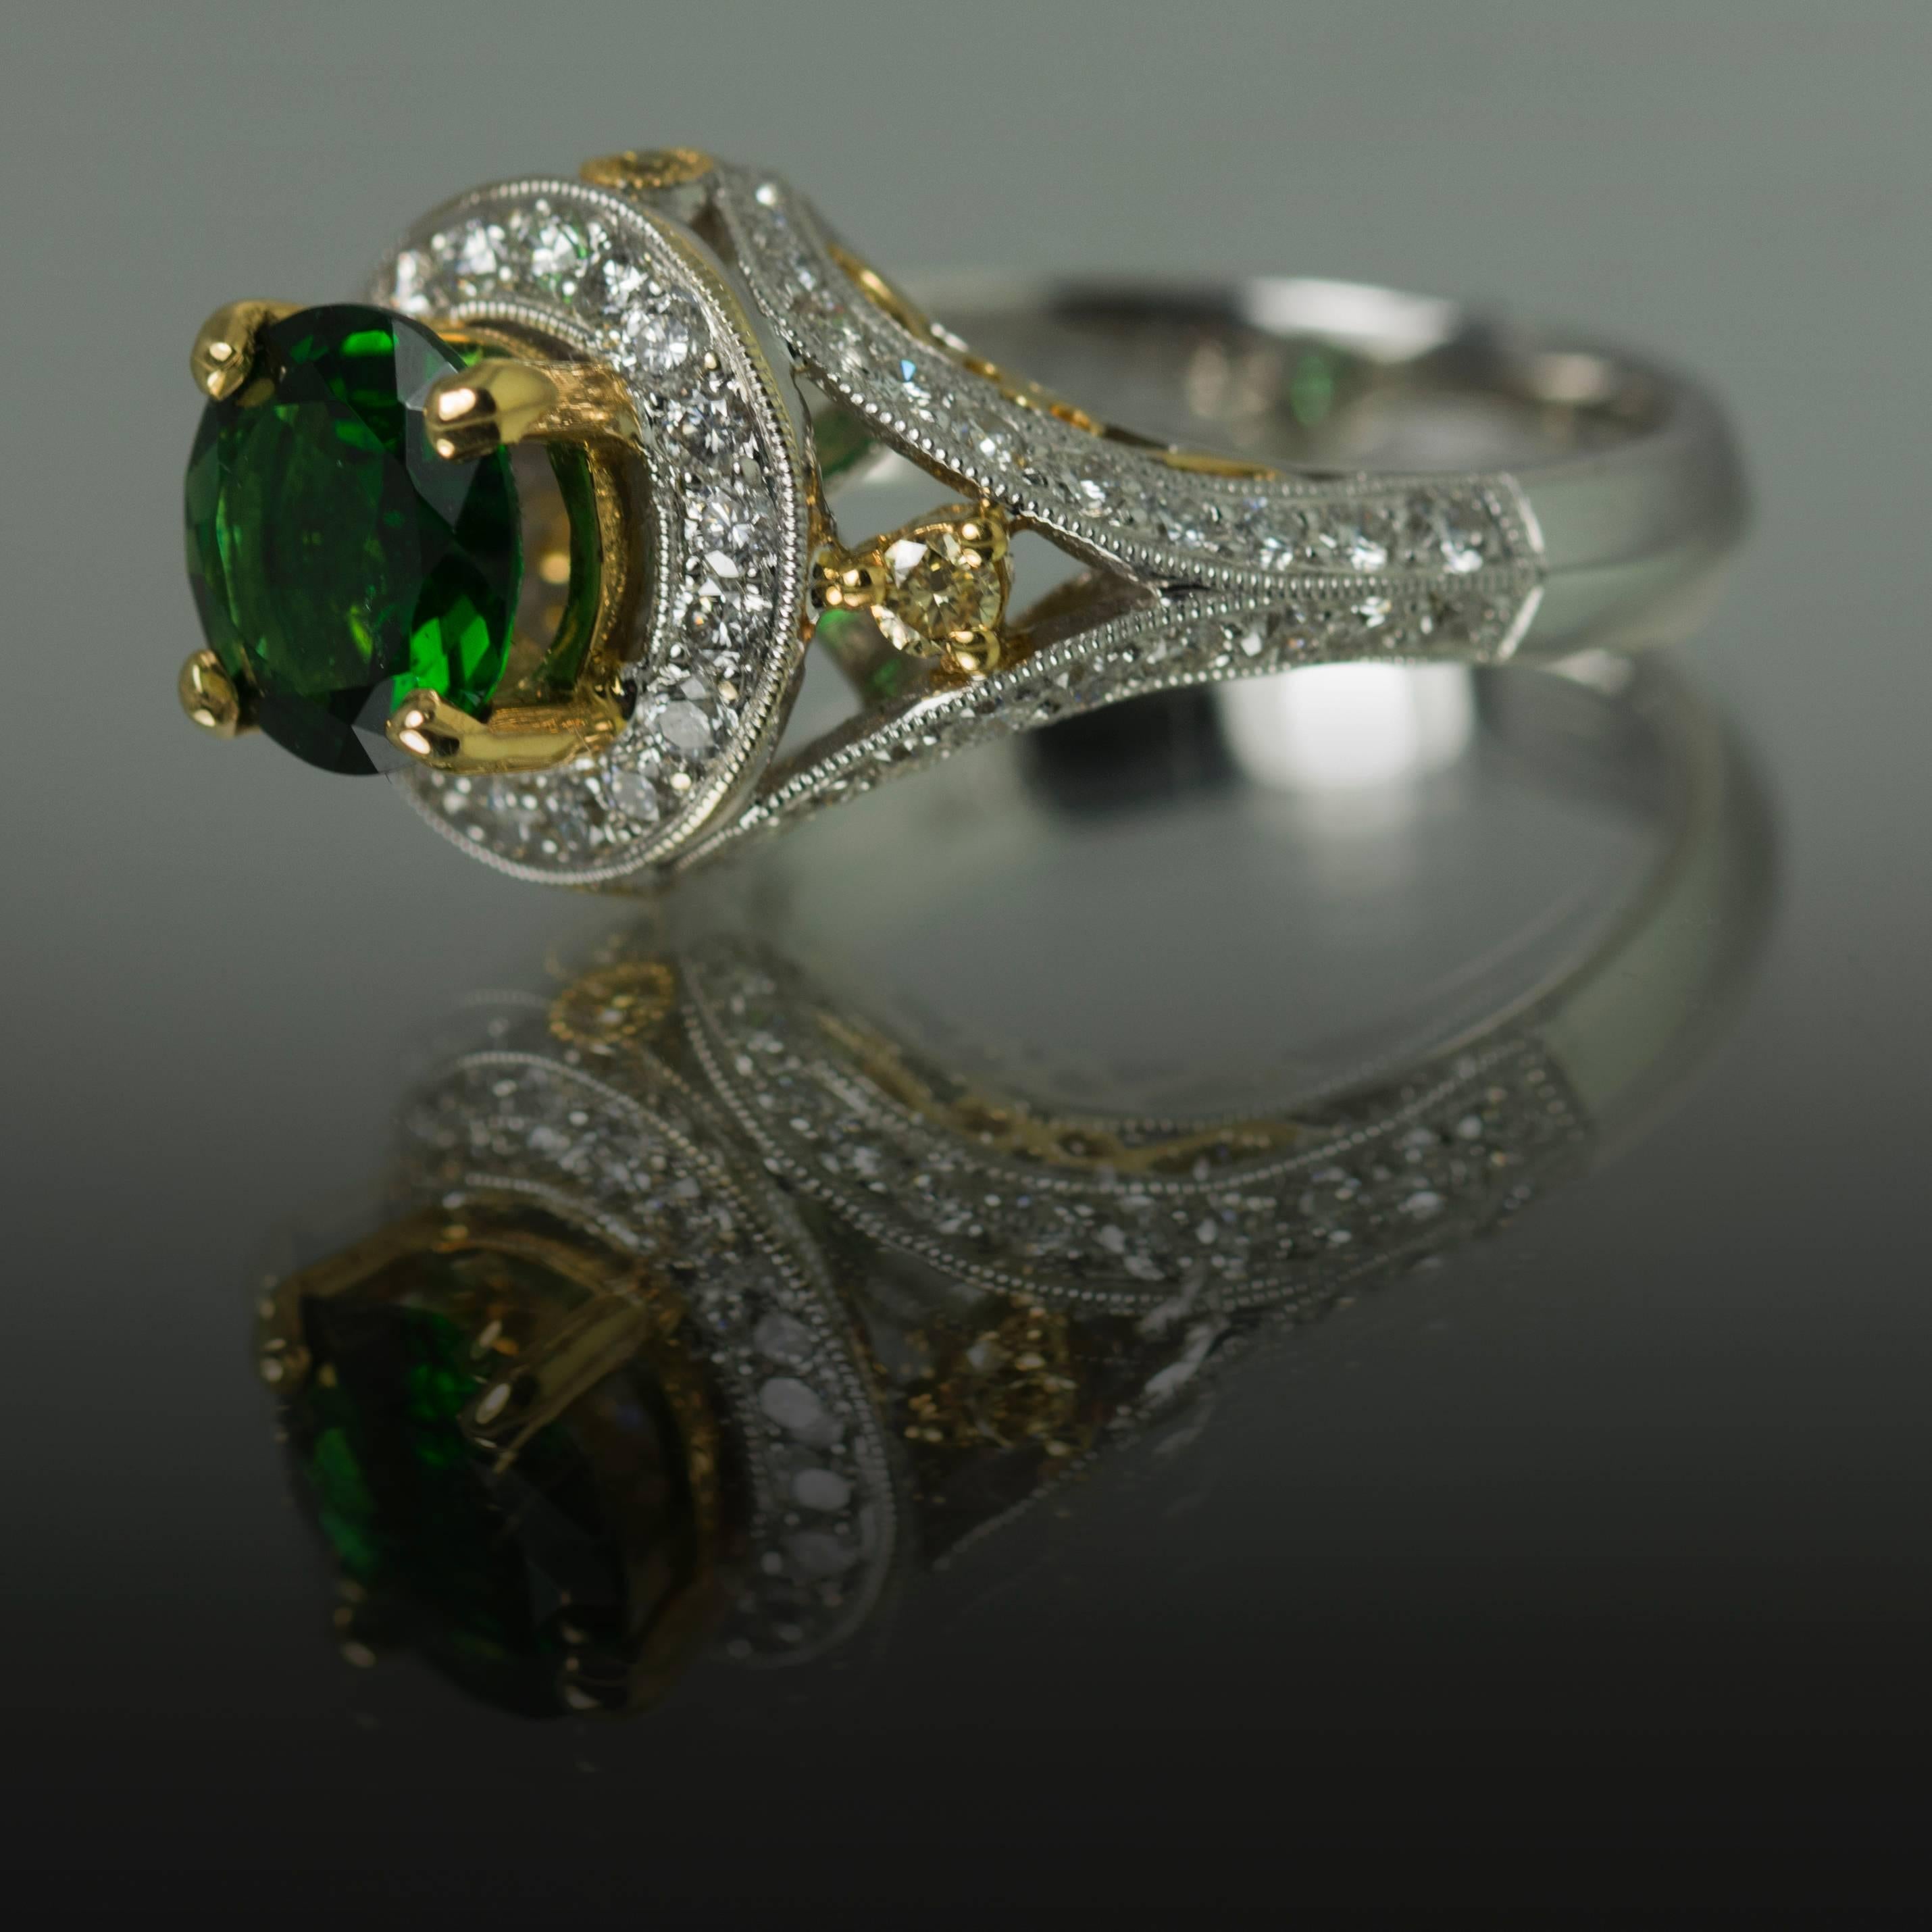 18K Ring with 1 Oval Chrome Tourmaline Weighing 1.40 Carats, Yellow Diamonds Weighing 0.11 Carats, and White Diamonds Weighing 0.73 Carats. 